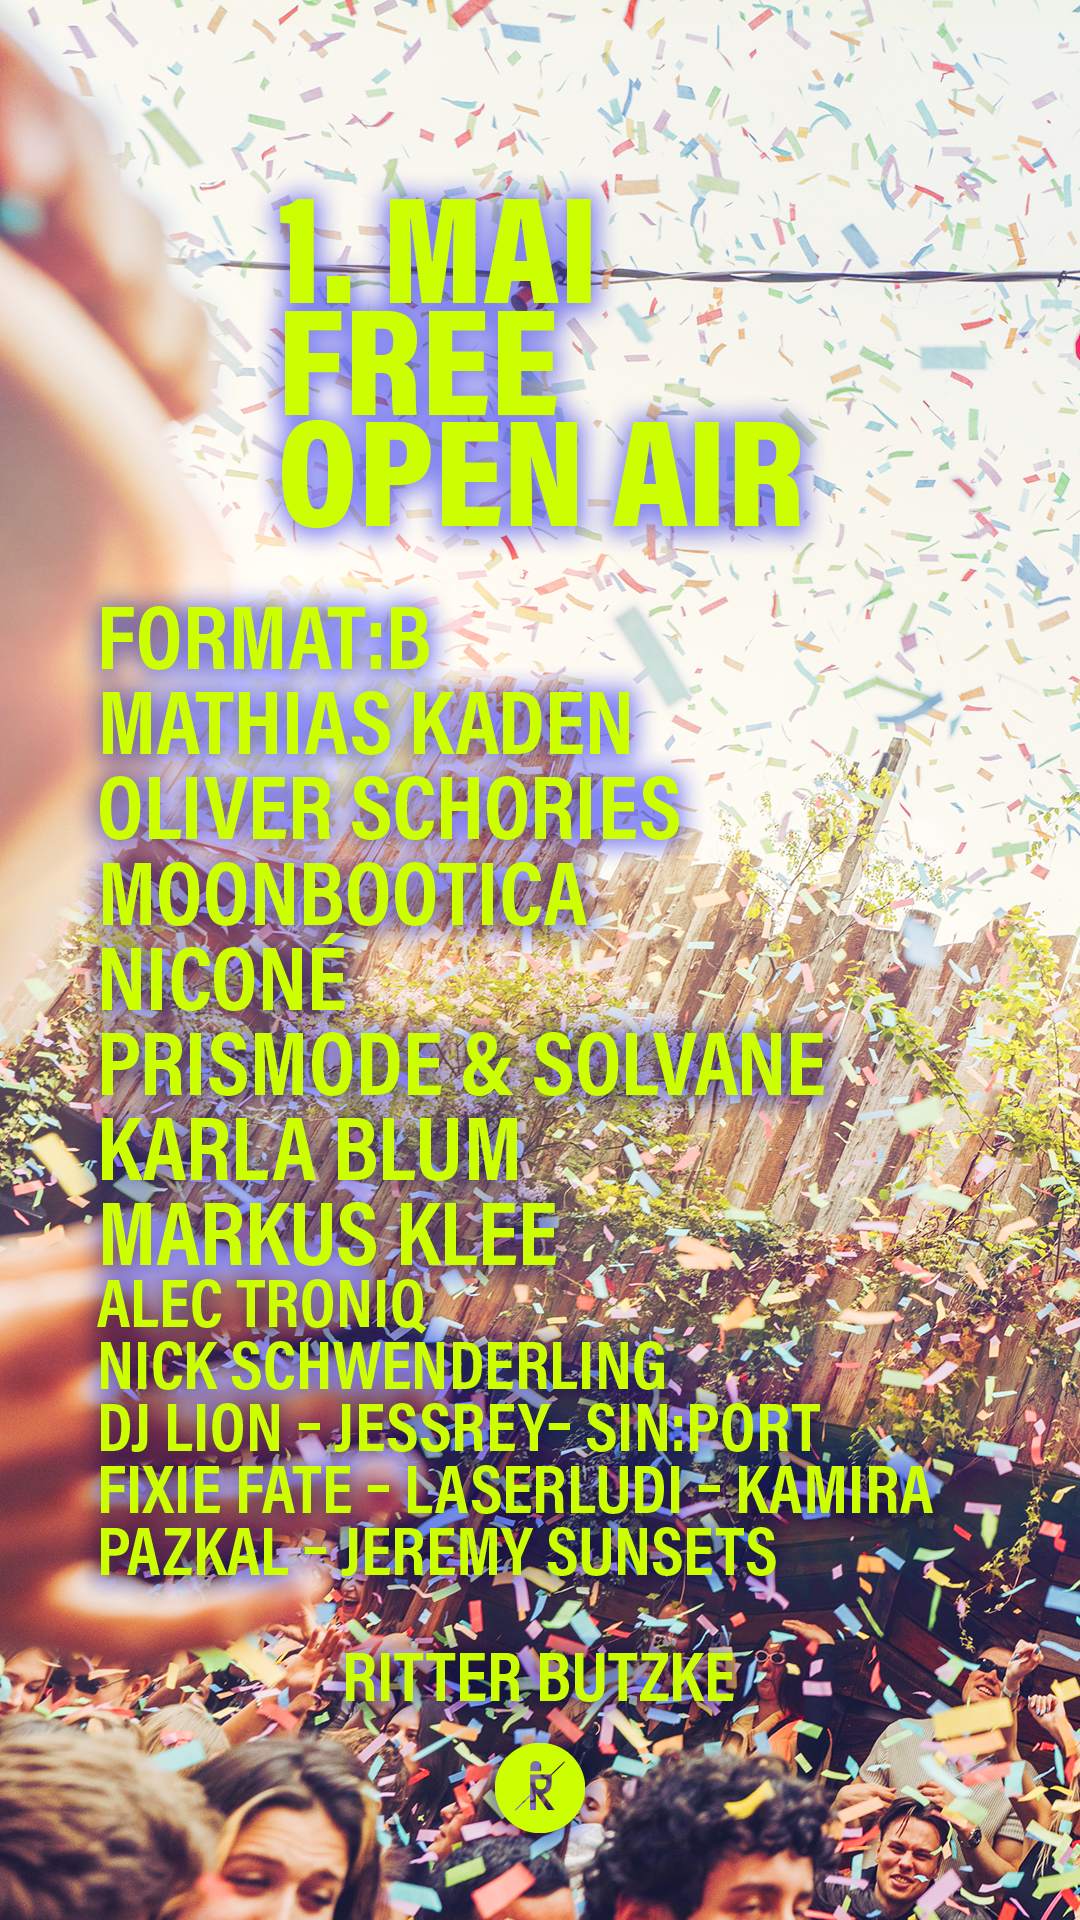 Free Open Air with Format: B - フライヤー裏